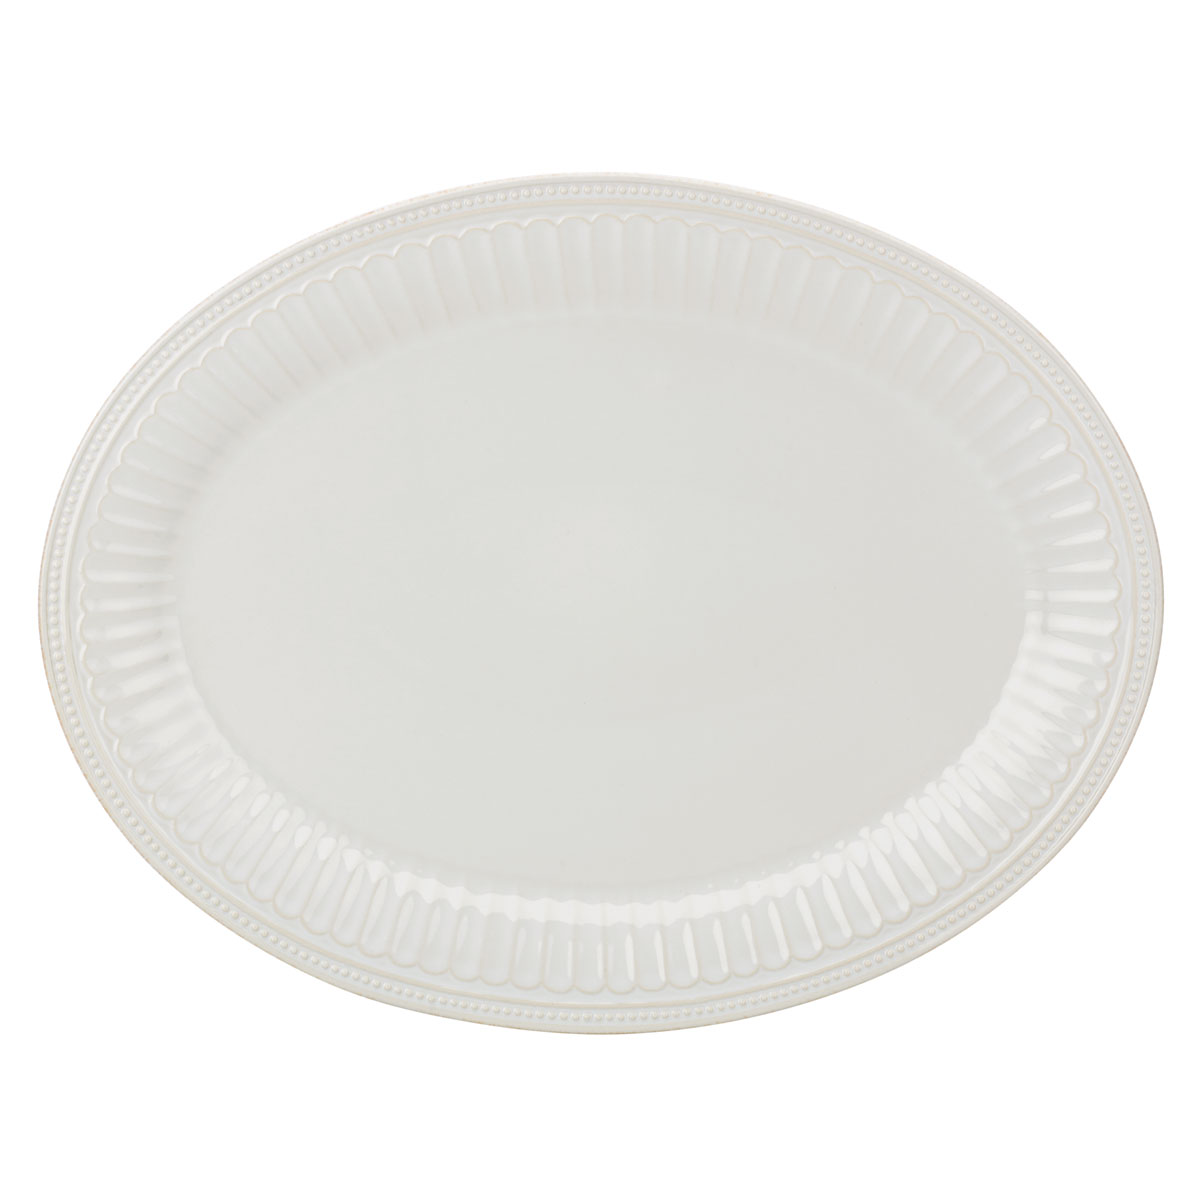 Lenox French Perle Groove White China Platter